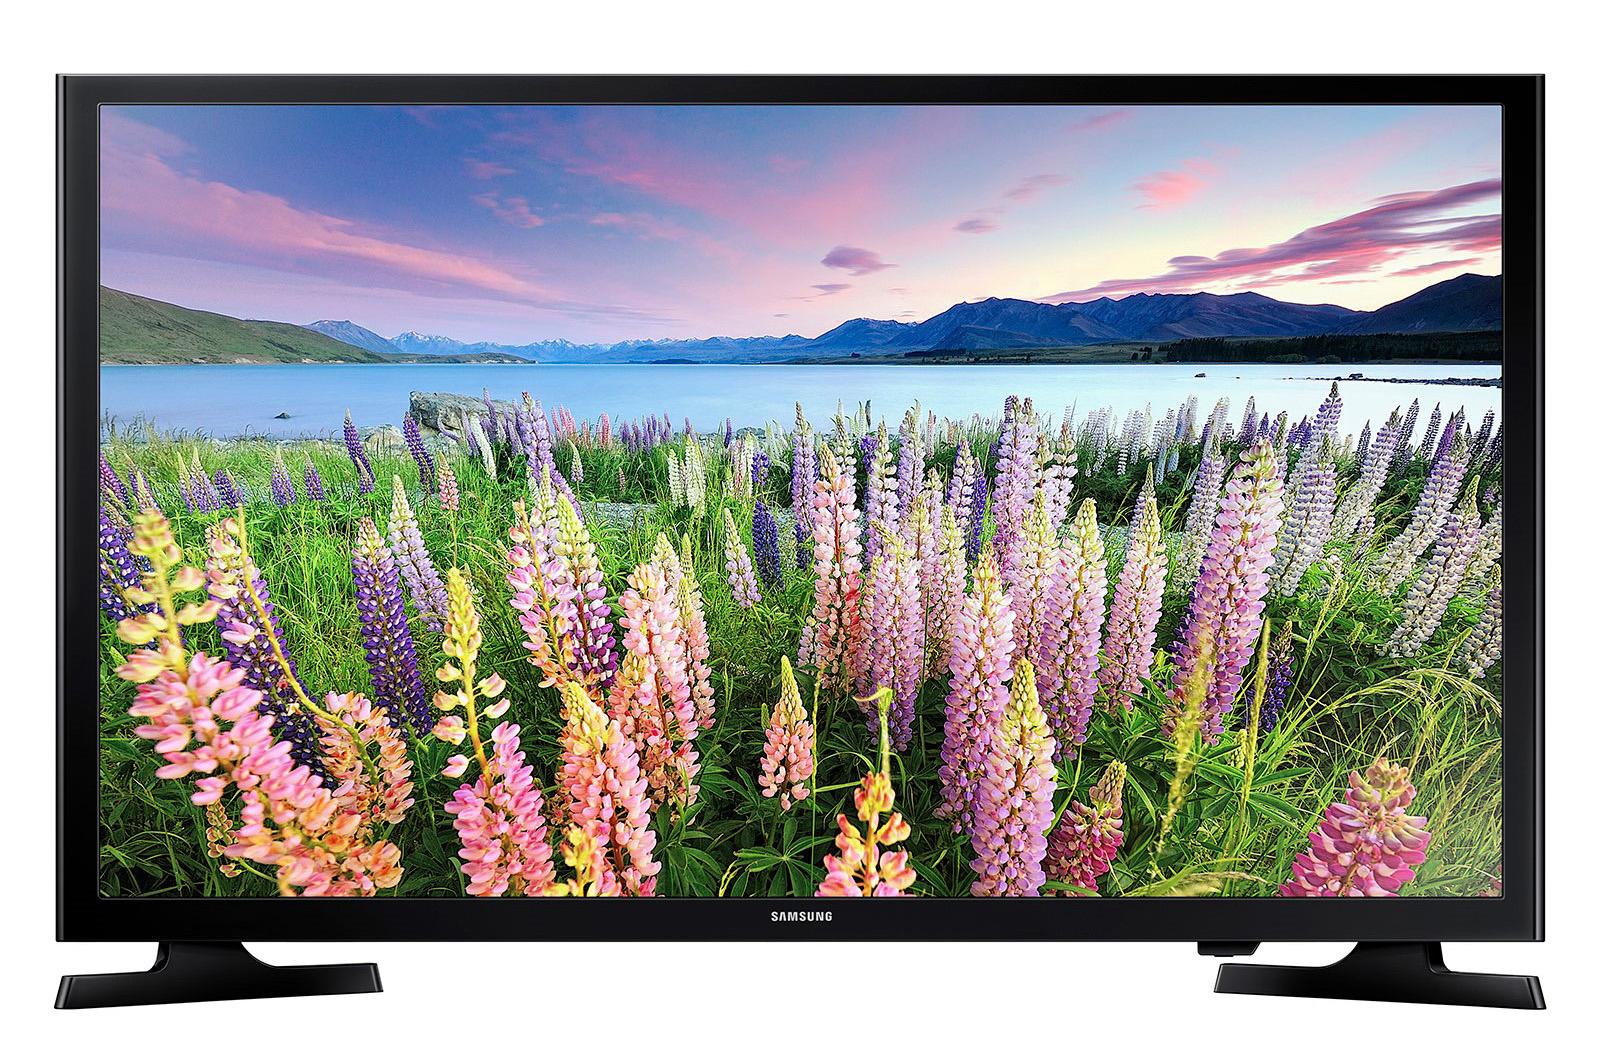 40in Samsung 5 Series 1080p LED Smart HDTV for $164.66 Shipped